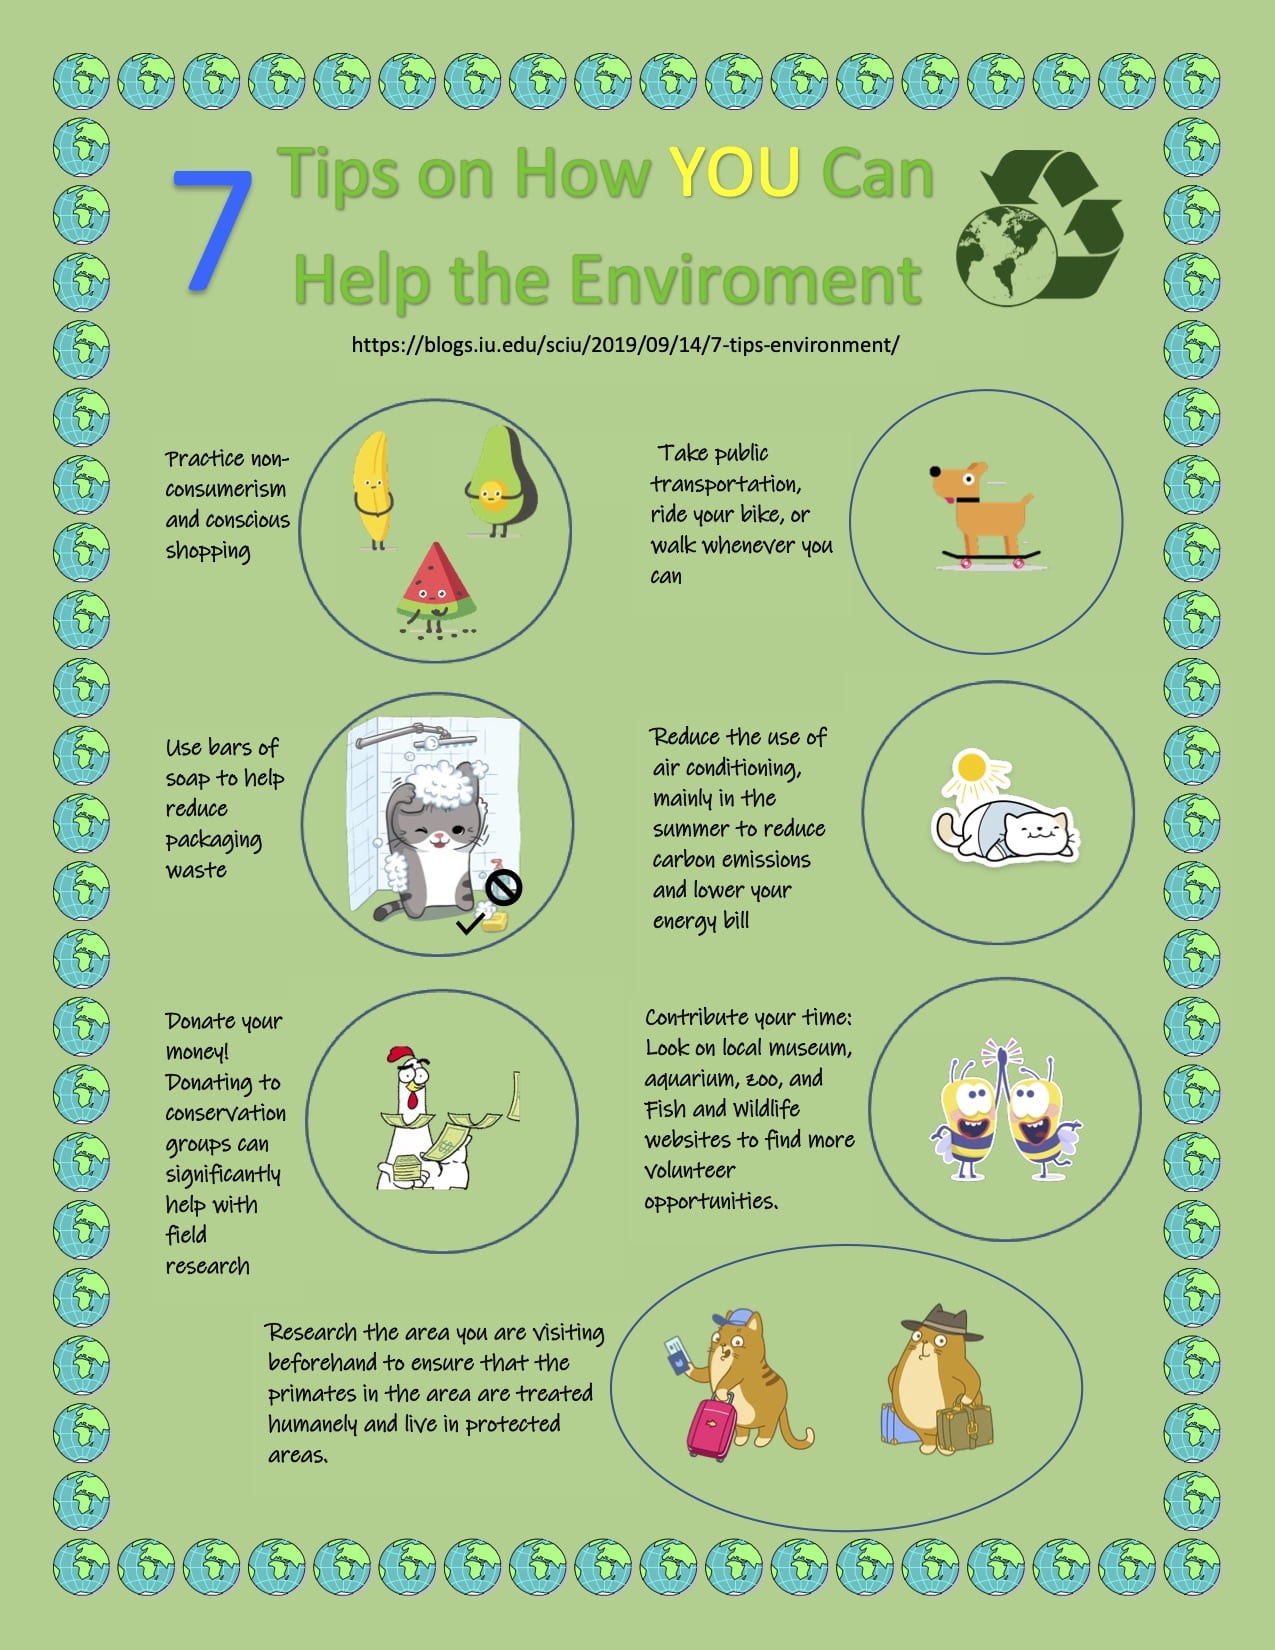 [infographic about environment friendly tips. to read the original post go to https://blogs.iu.edu/sciu/2019/09/14/7-tips-environment/]